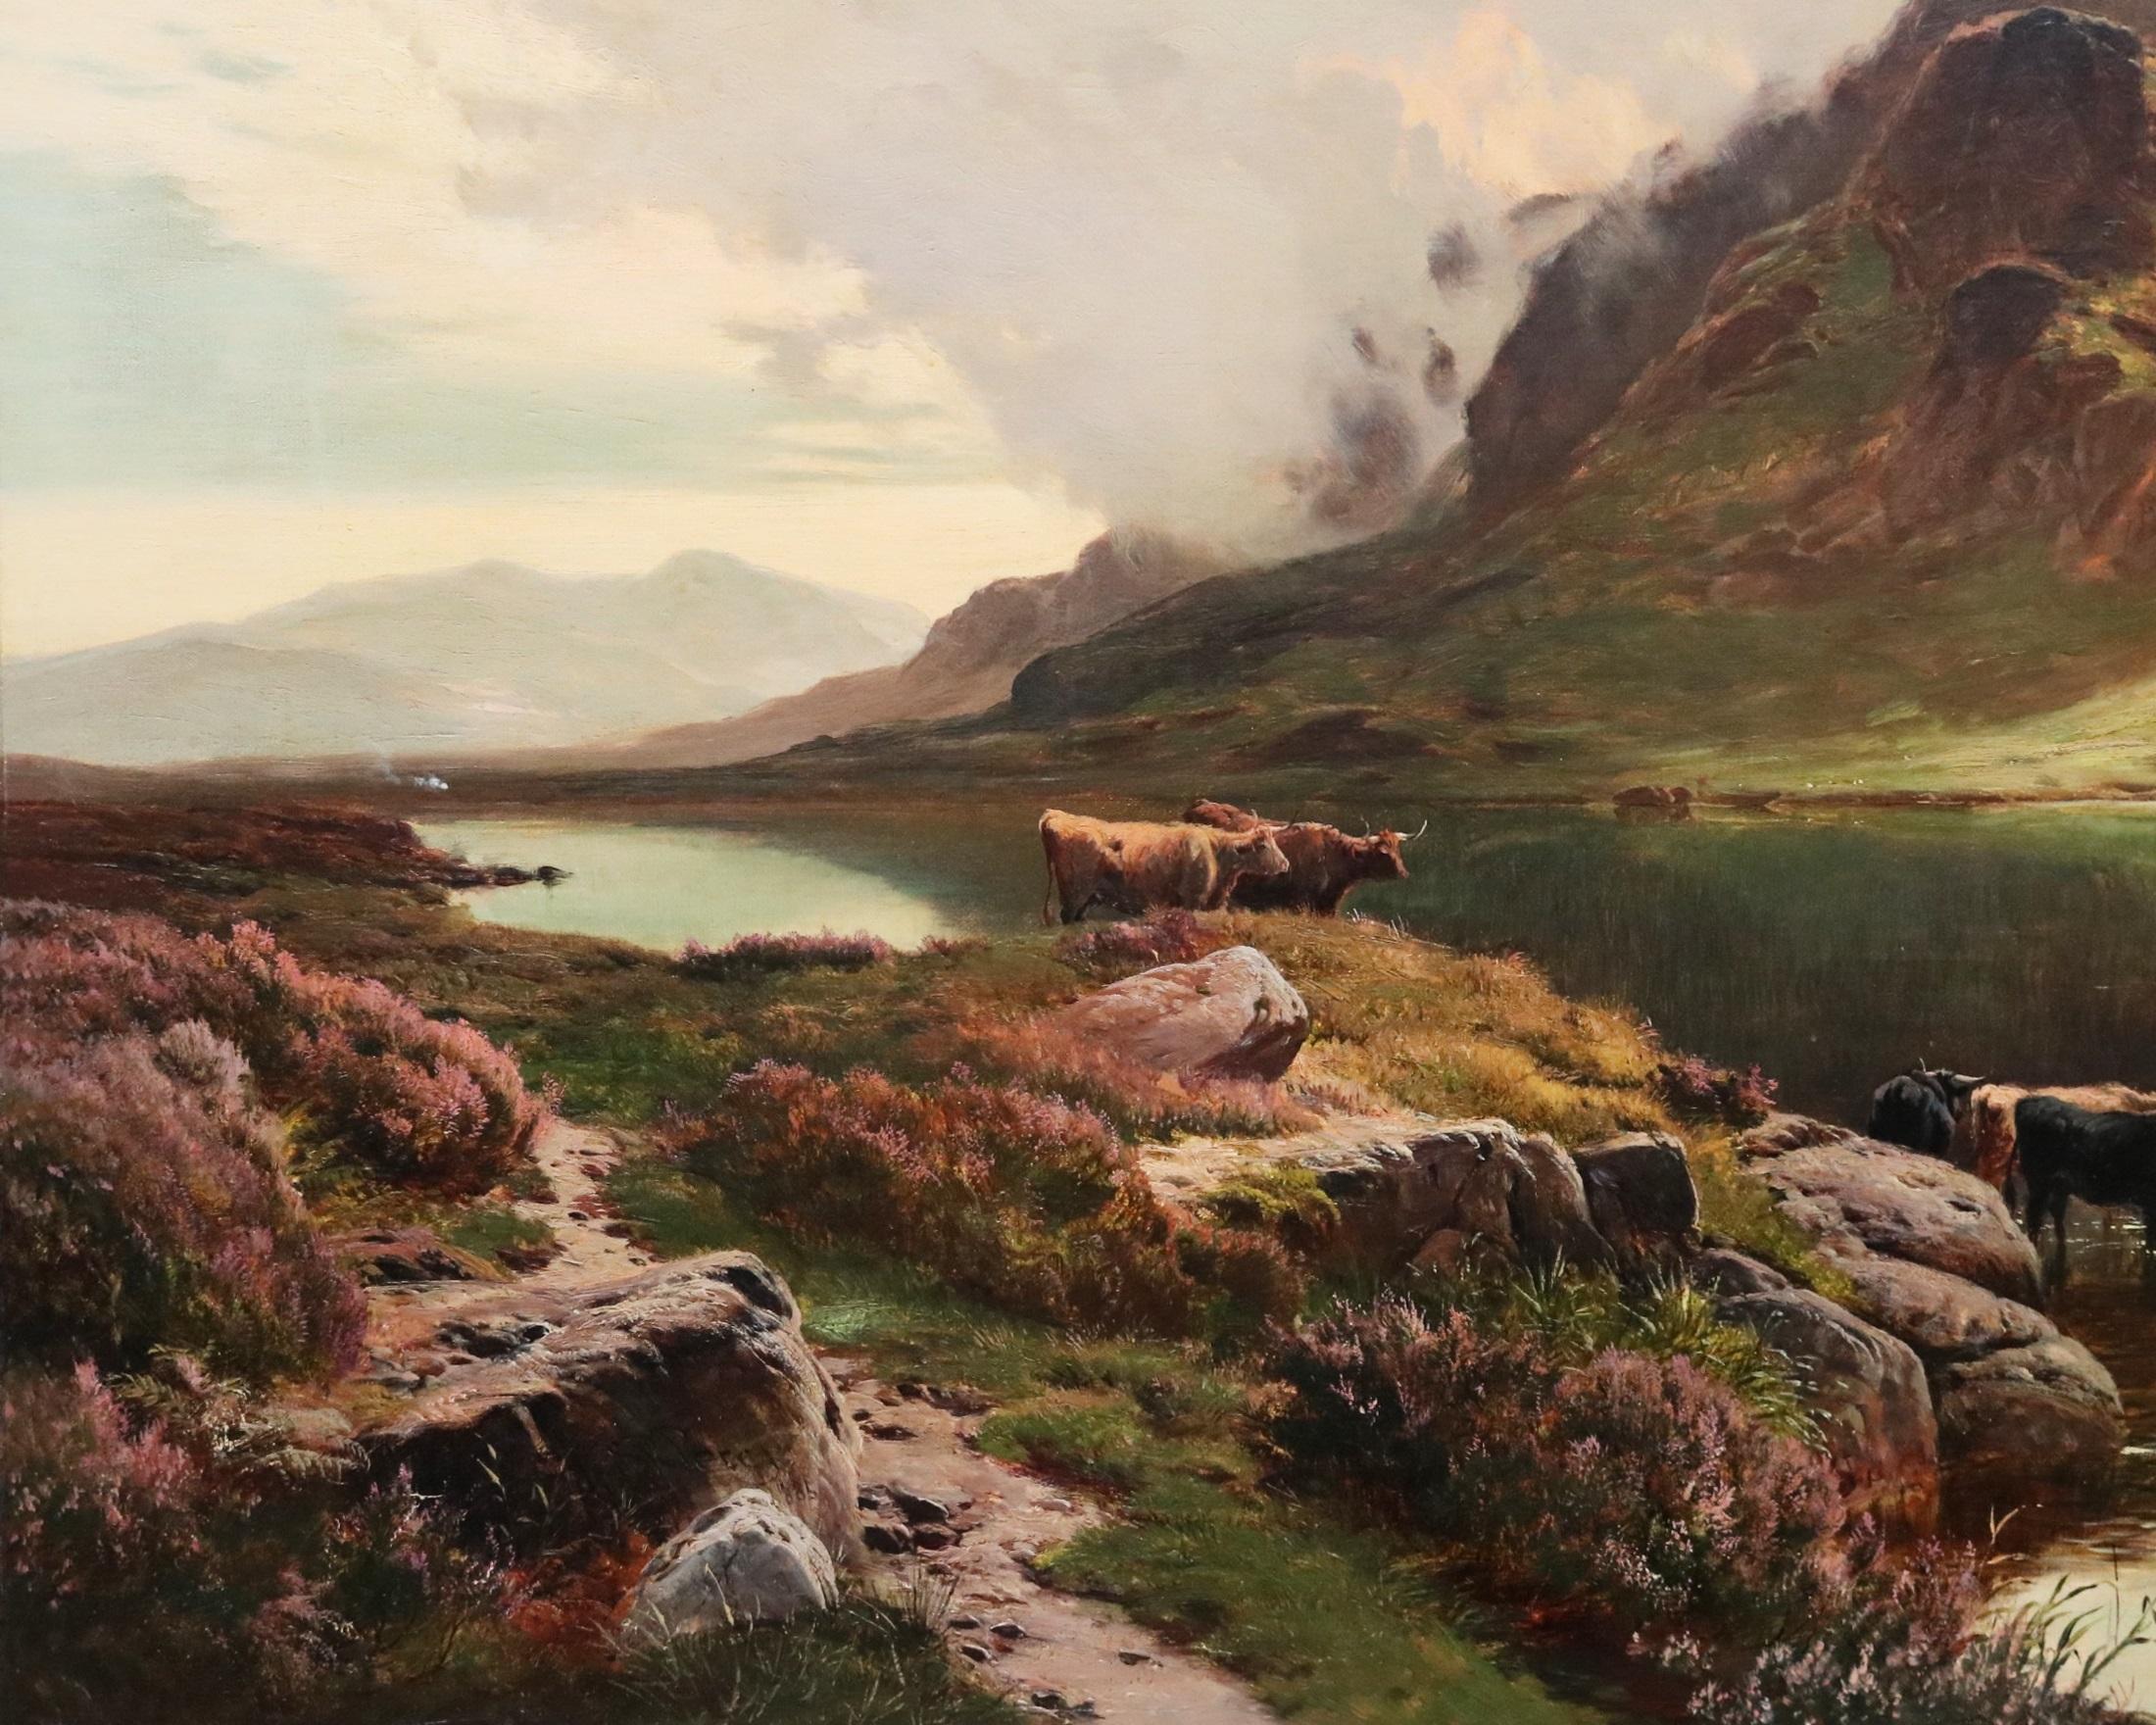 ‘Llyn Idwal, North Wales’ by Sidney Richard Percy (1822-1886). The painting – which depicts cattle watering at the edge of the famous lake in Snowdonia – is signed by the artist and dated 1885. ‘Llyn Idwal, North Wales’ was the final painting of